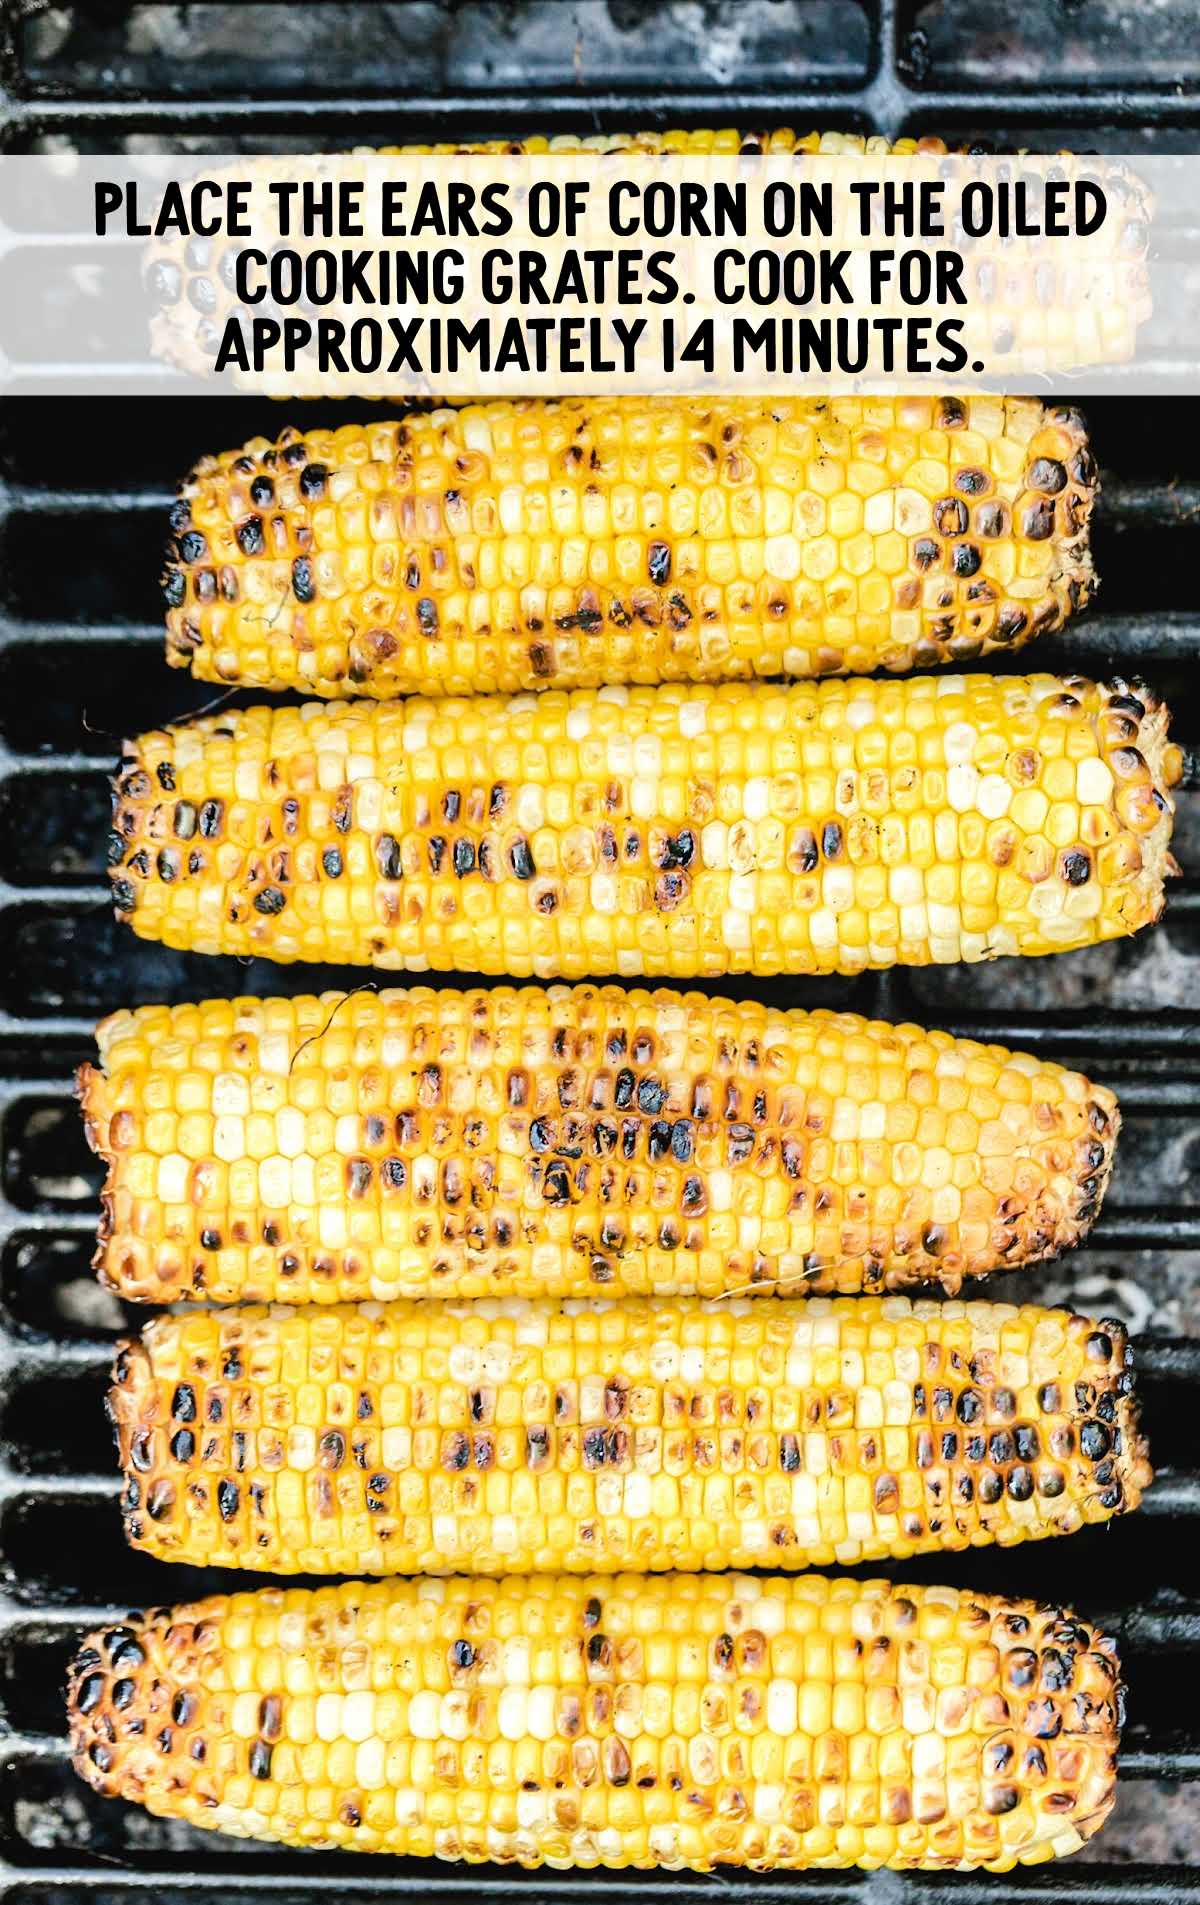 corn after being cooked and oiled on a grill